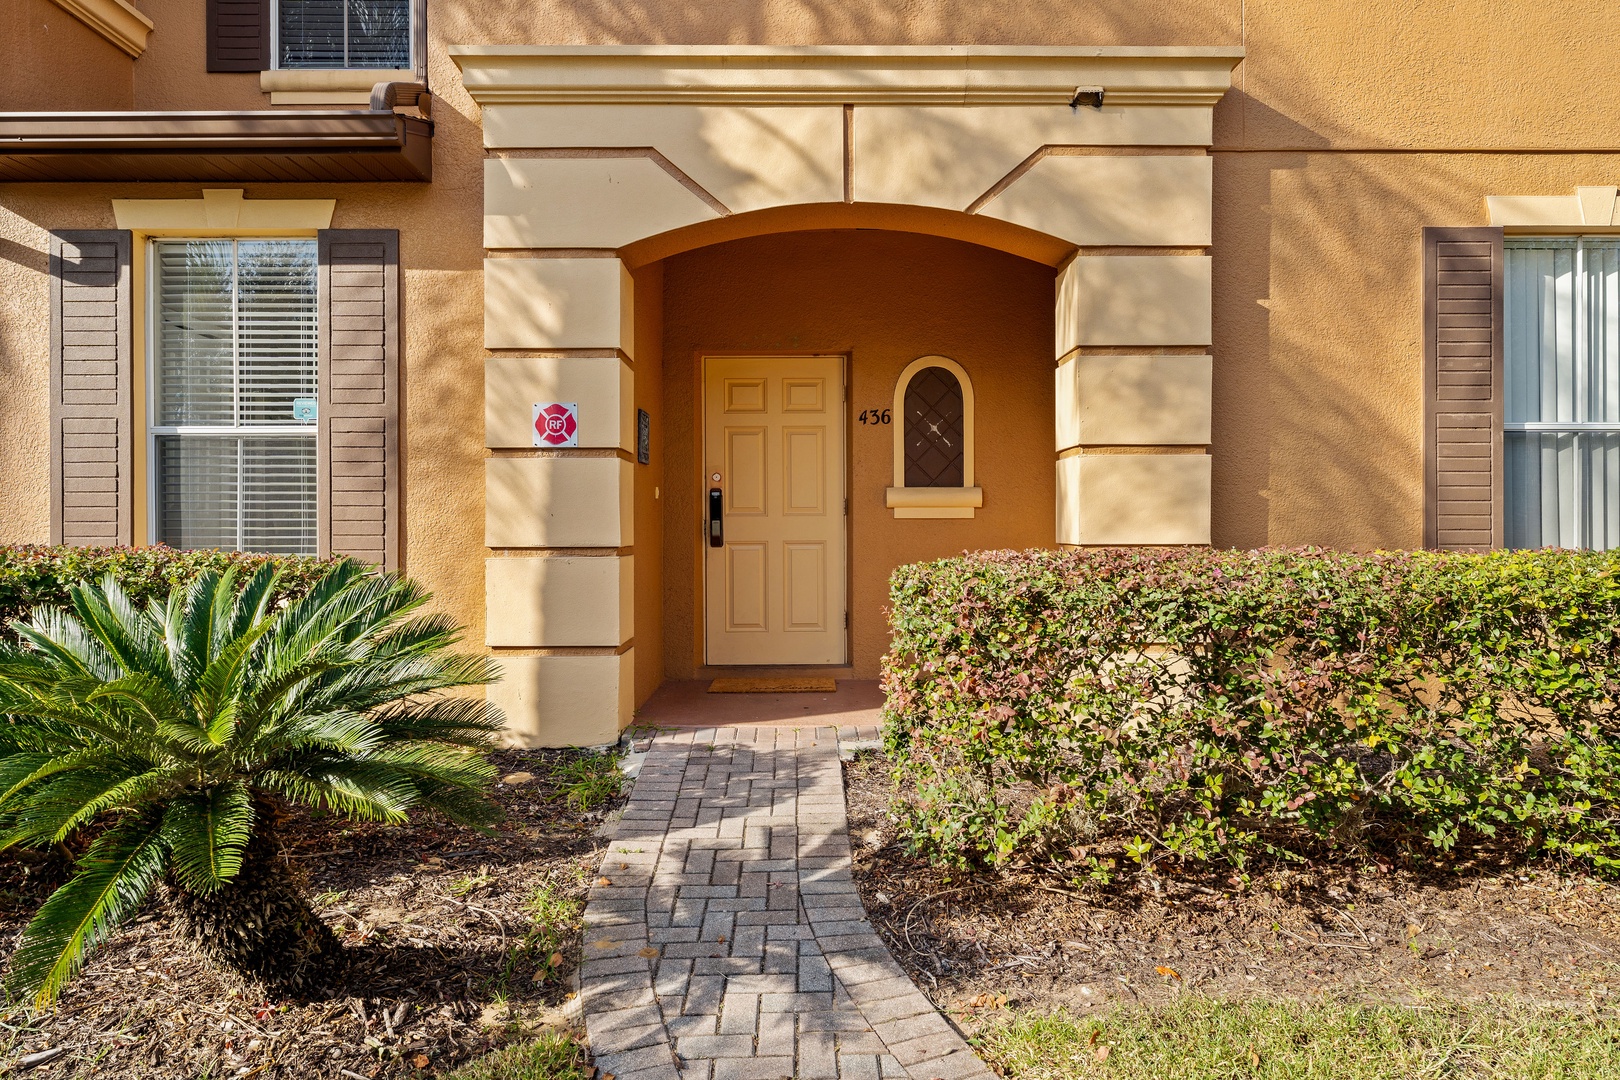 This home is equipped with keyless entry for guest convenience